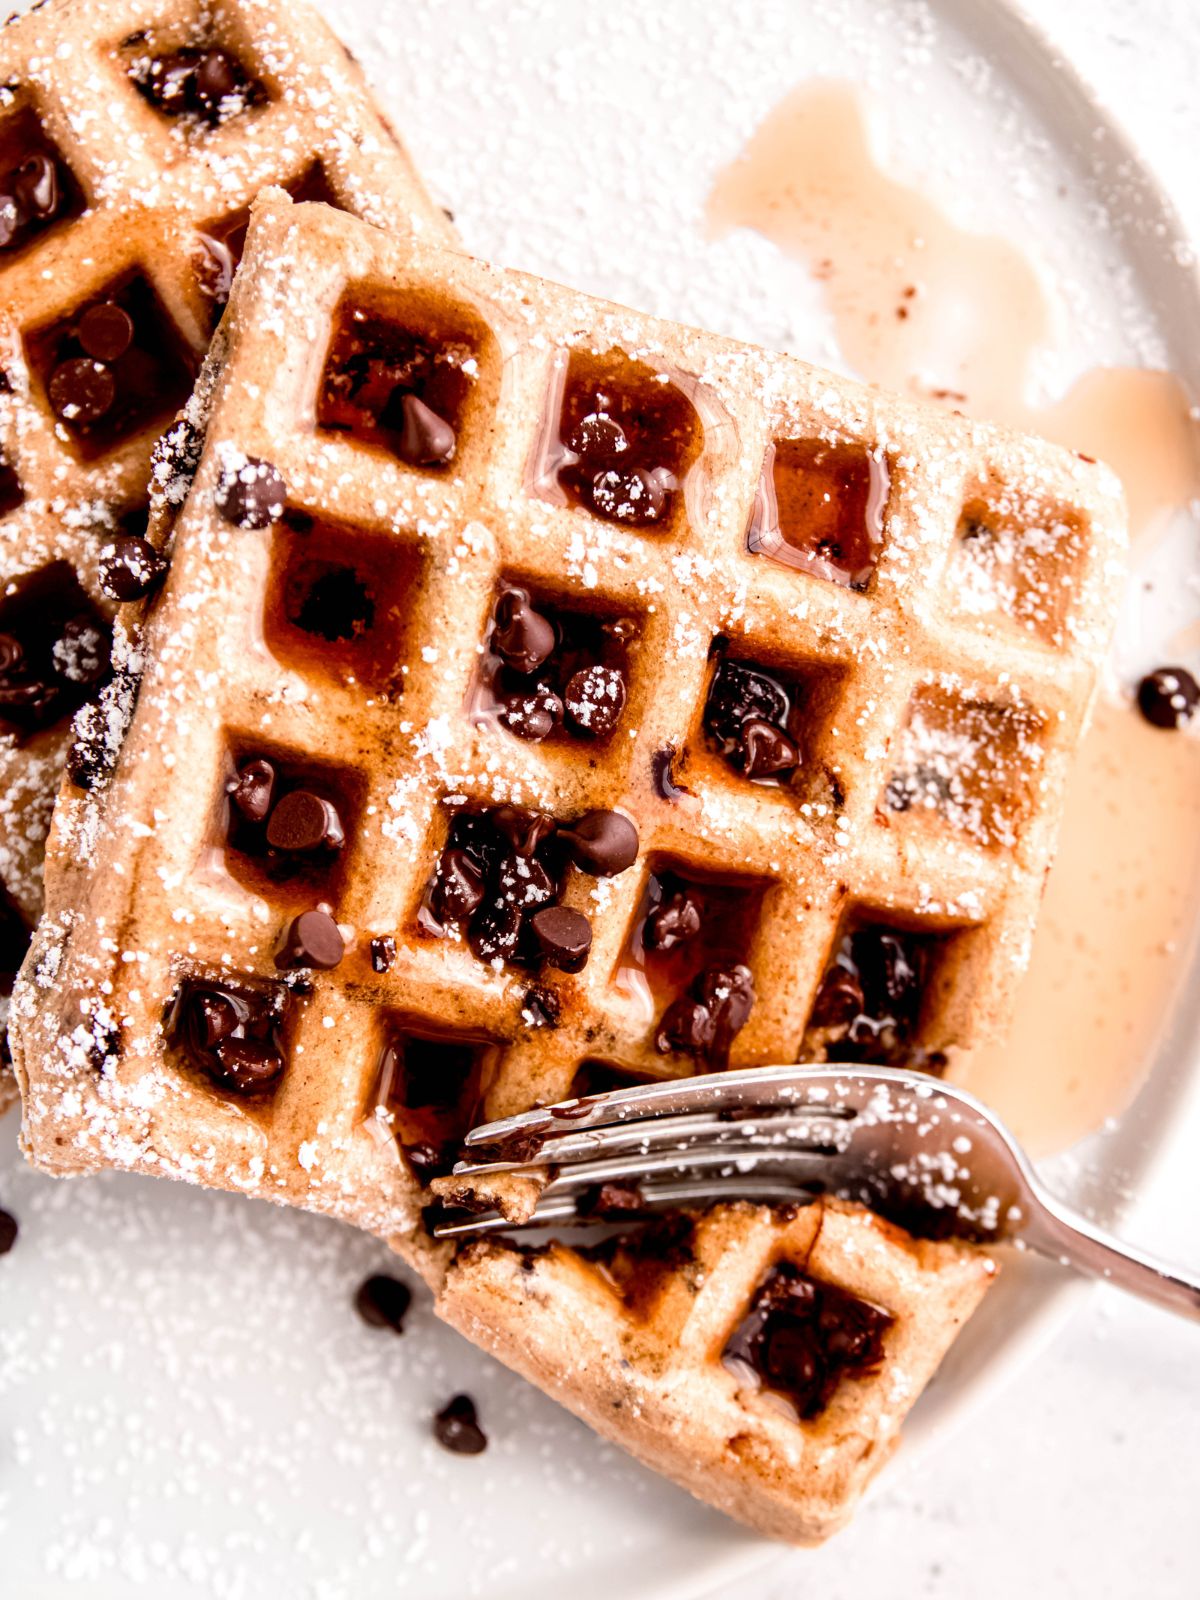 hero shot of a fork taking a bite out of a chocolate chip waffle drizzled with maple syrup and sprinkled with powdered sugar.